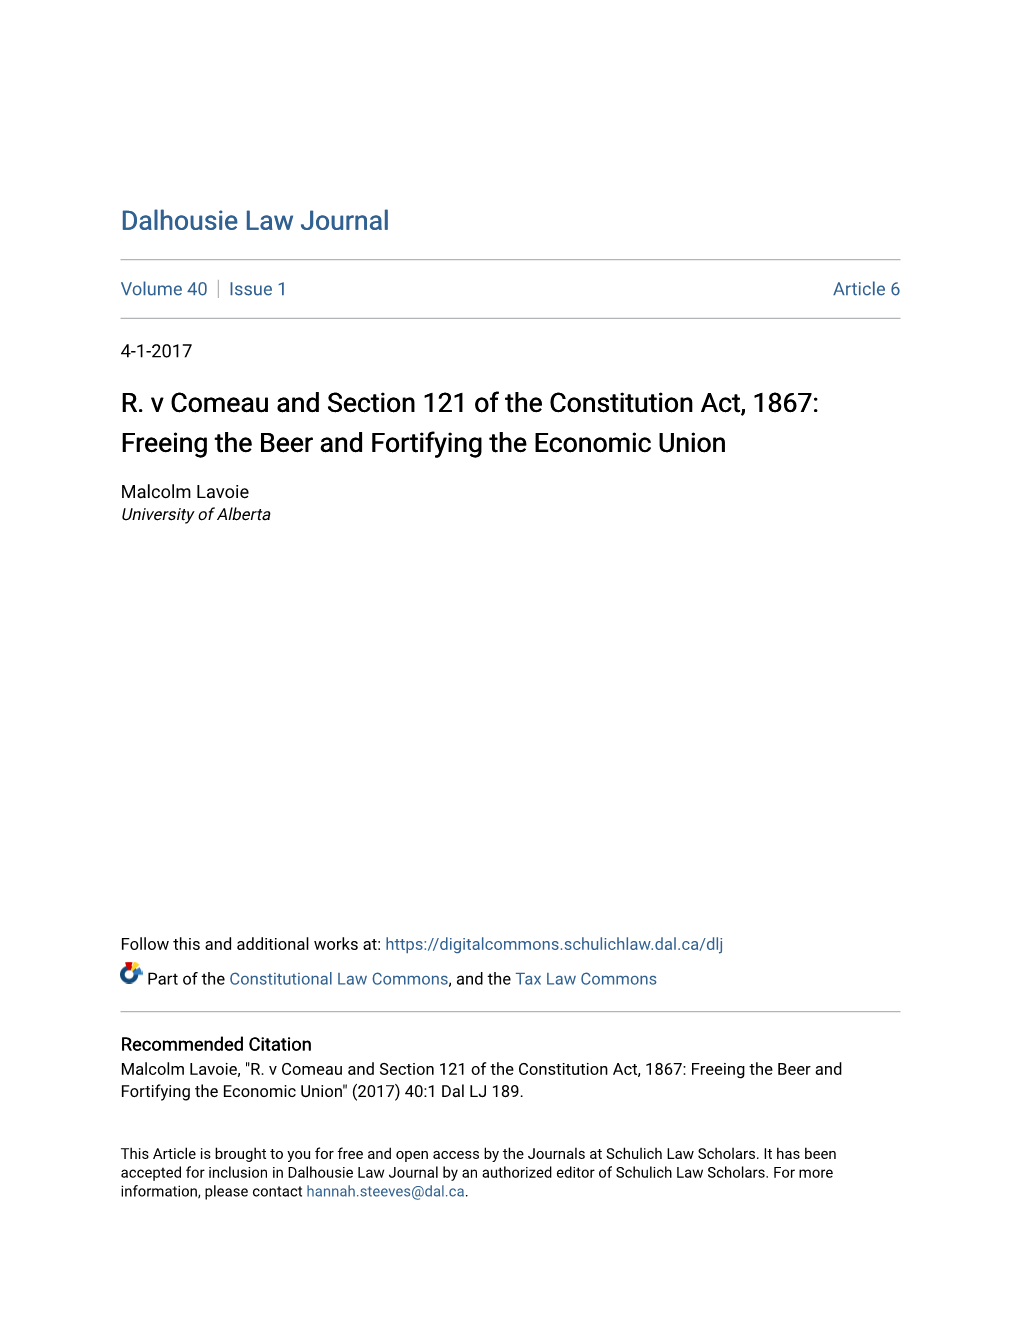 R. V Comeau and Section 121 of the Constitution Act, 1867: Freeing the Beer and Fortifying the Economic Union